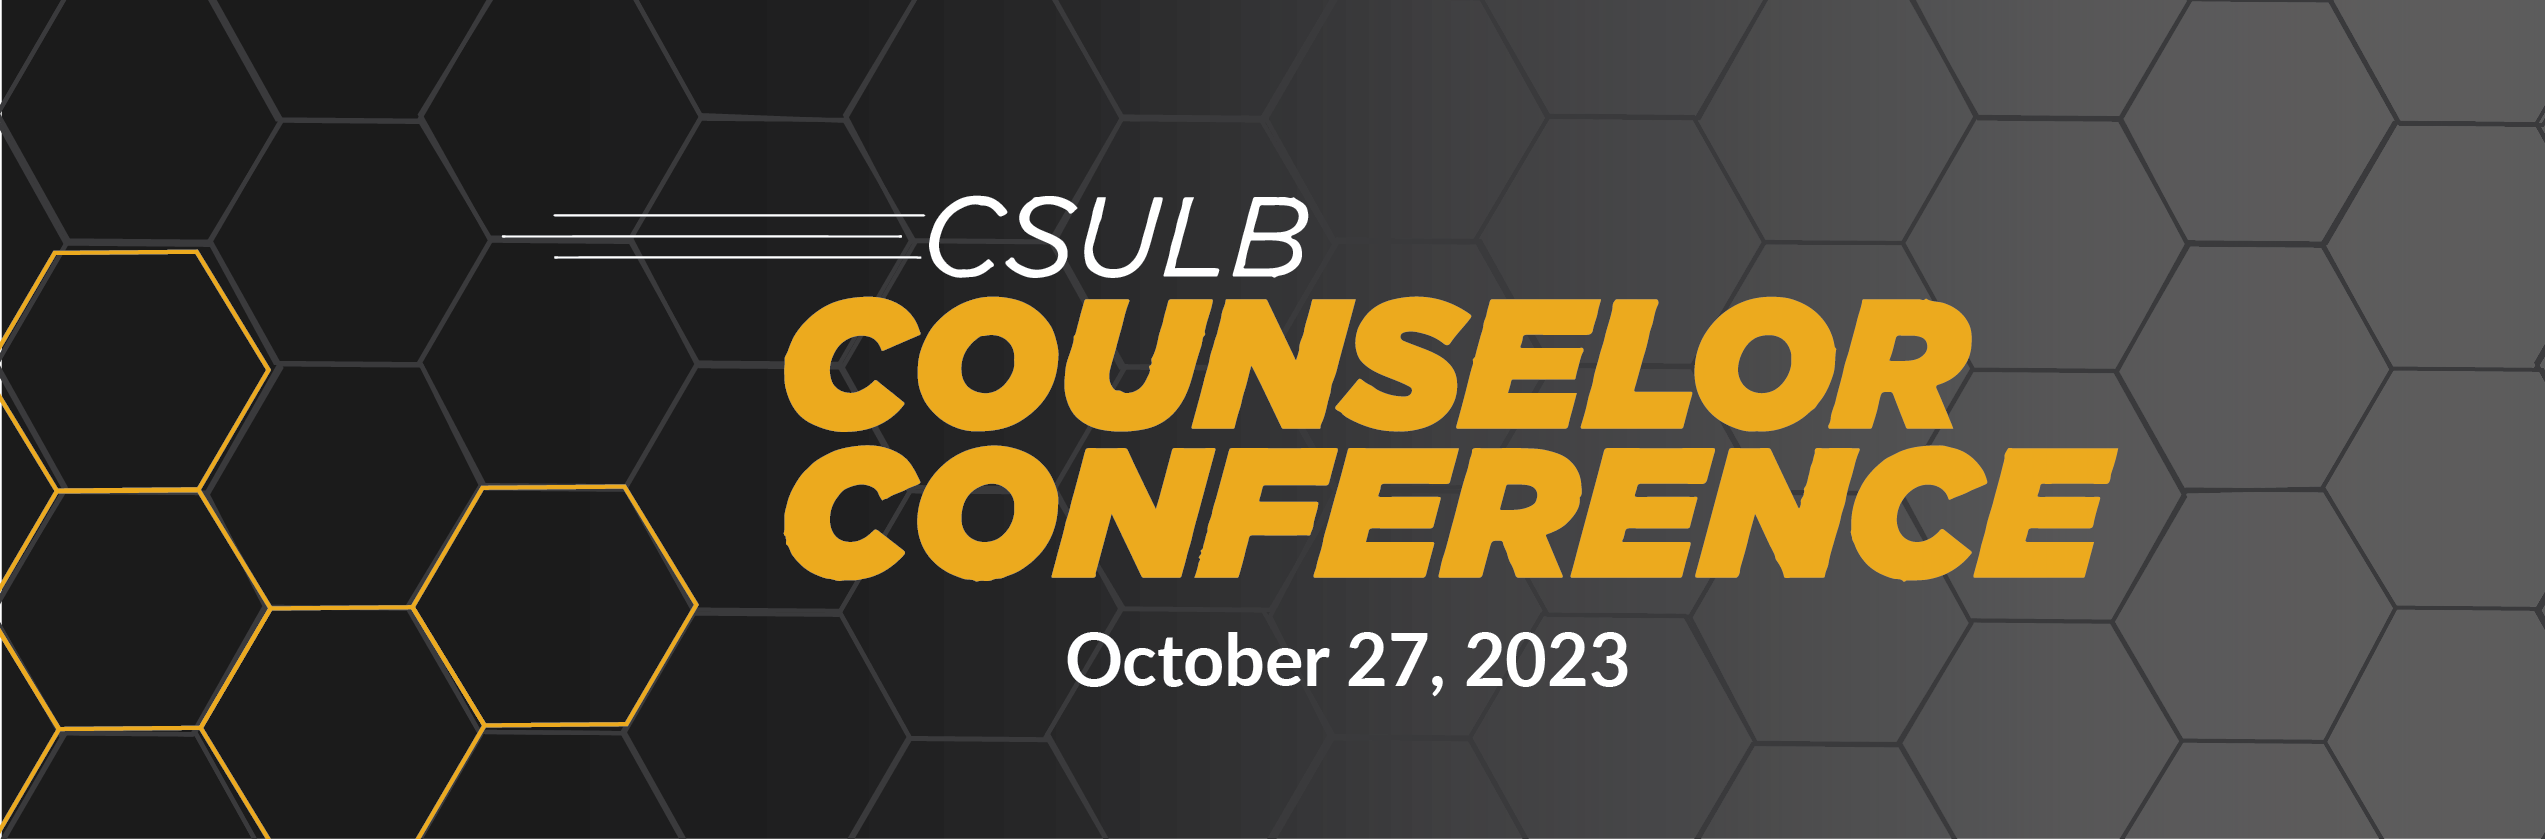 Banner For Counselor Conference